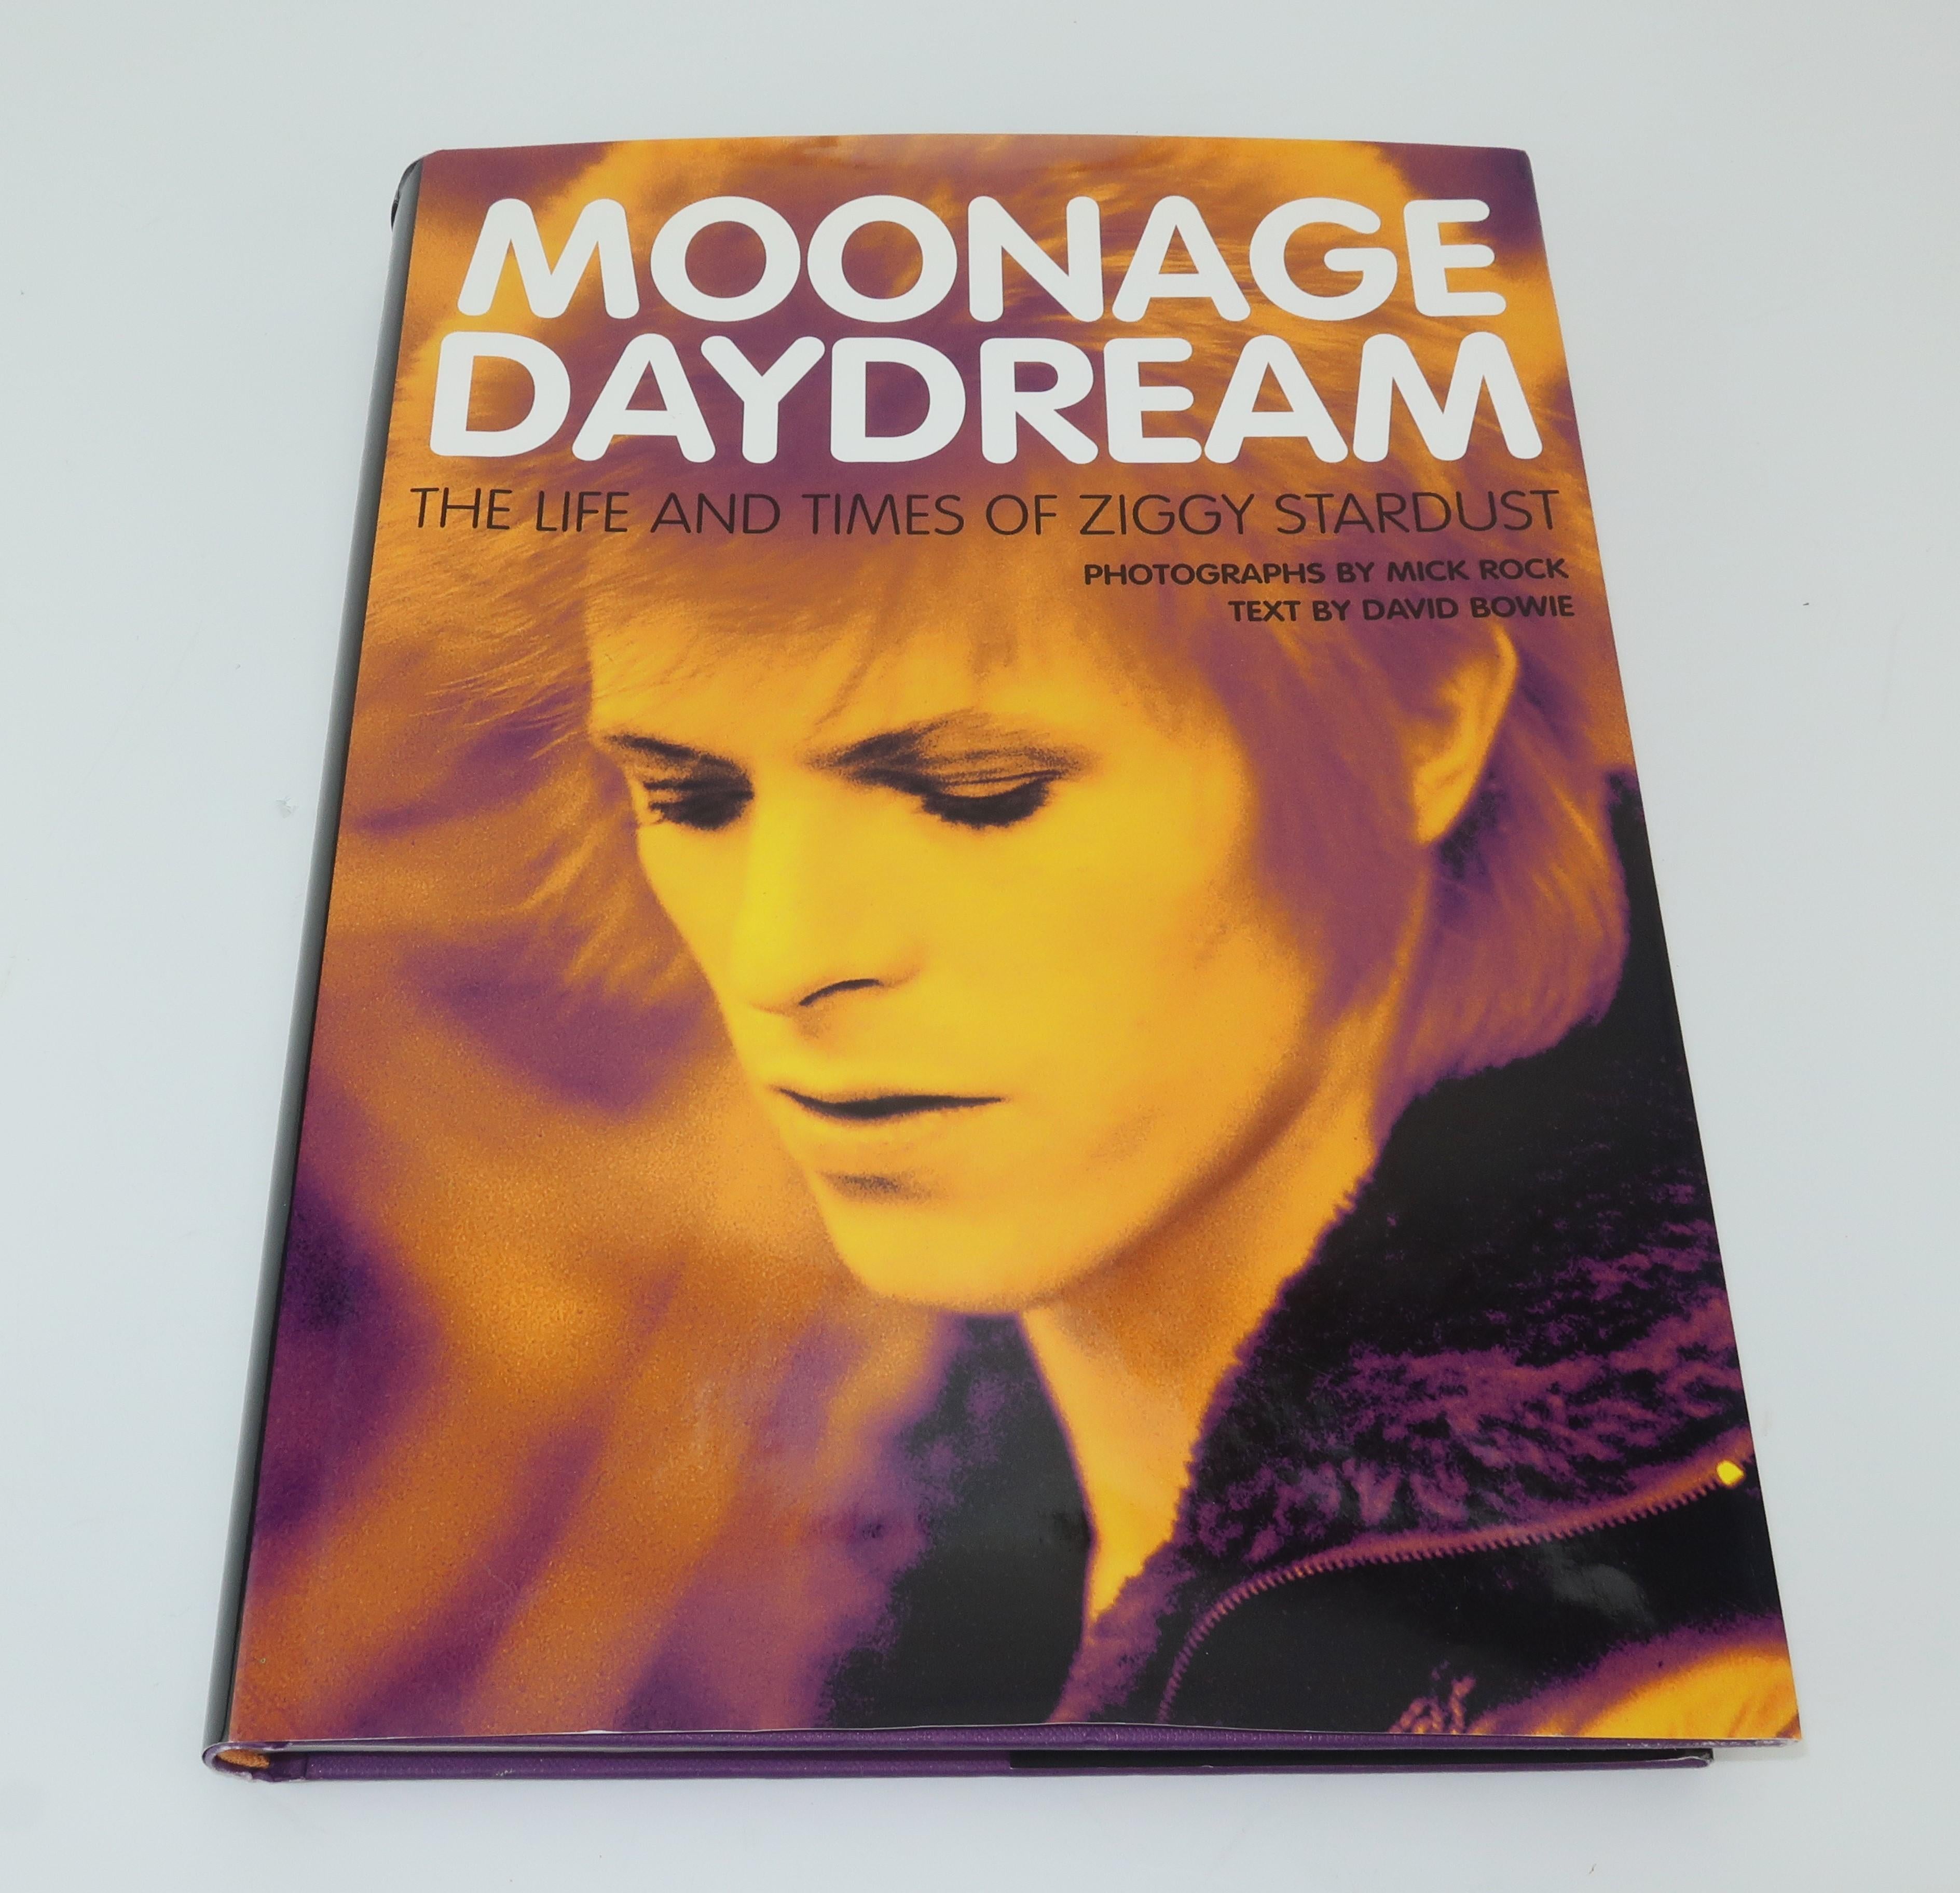 Moonage Daydream, The Life and Times of Ziggy Stardust, chronicles both the music and fashions of one of rock ‘n’ roll’s most enduring creations with 320 pages of masterful photography by Mick Rock and text from the artist behind the persona, David